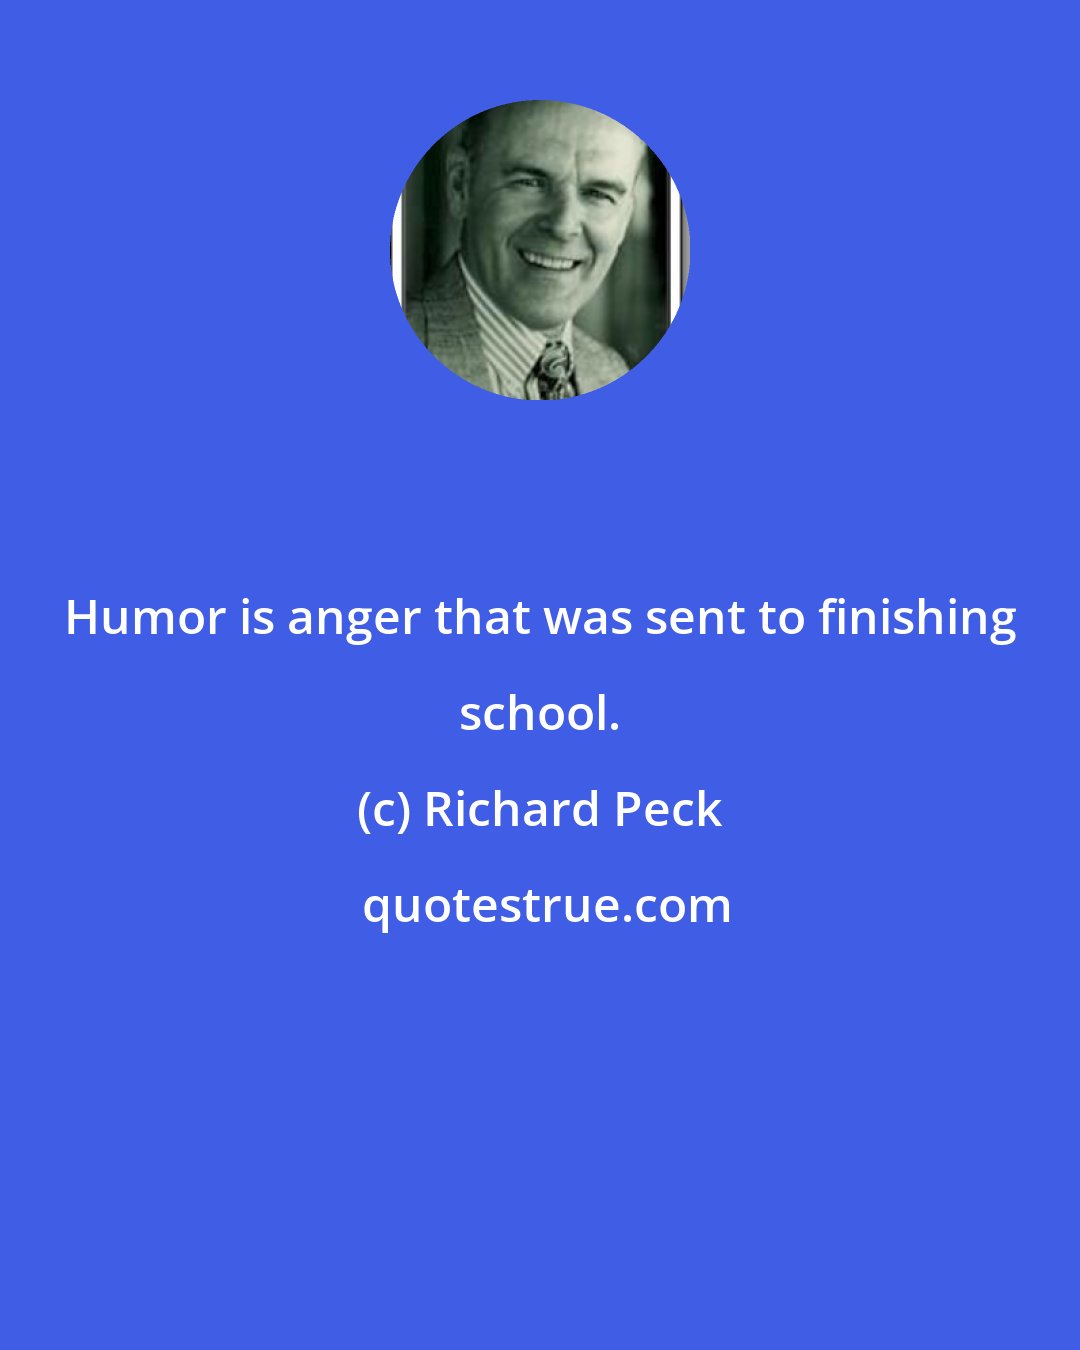 Richard Peck: Humor is anger that was sent to finishing school.